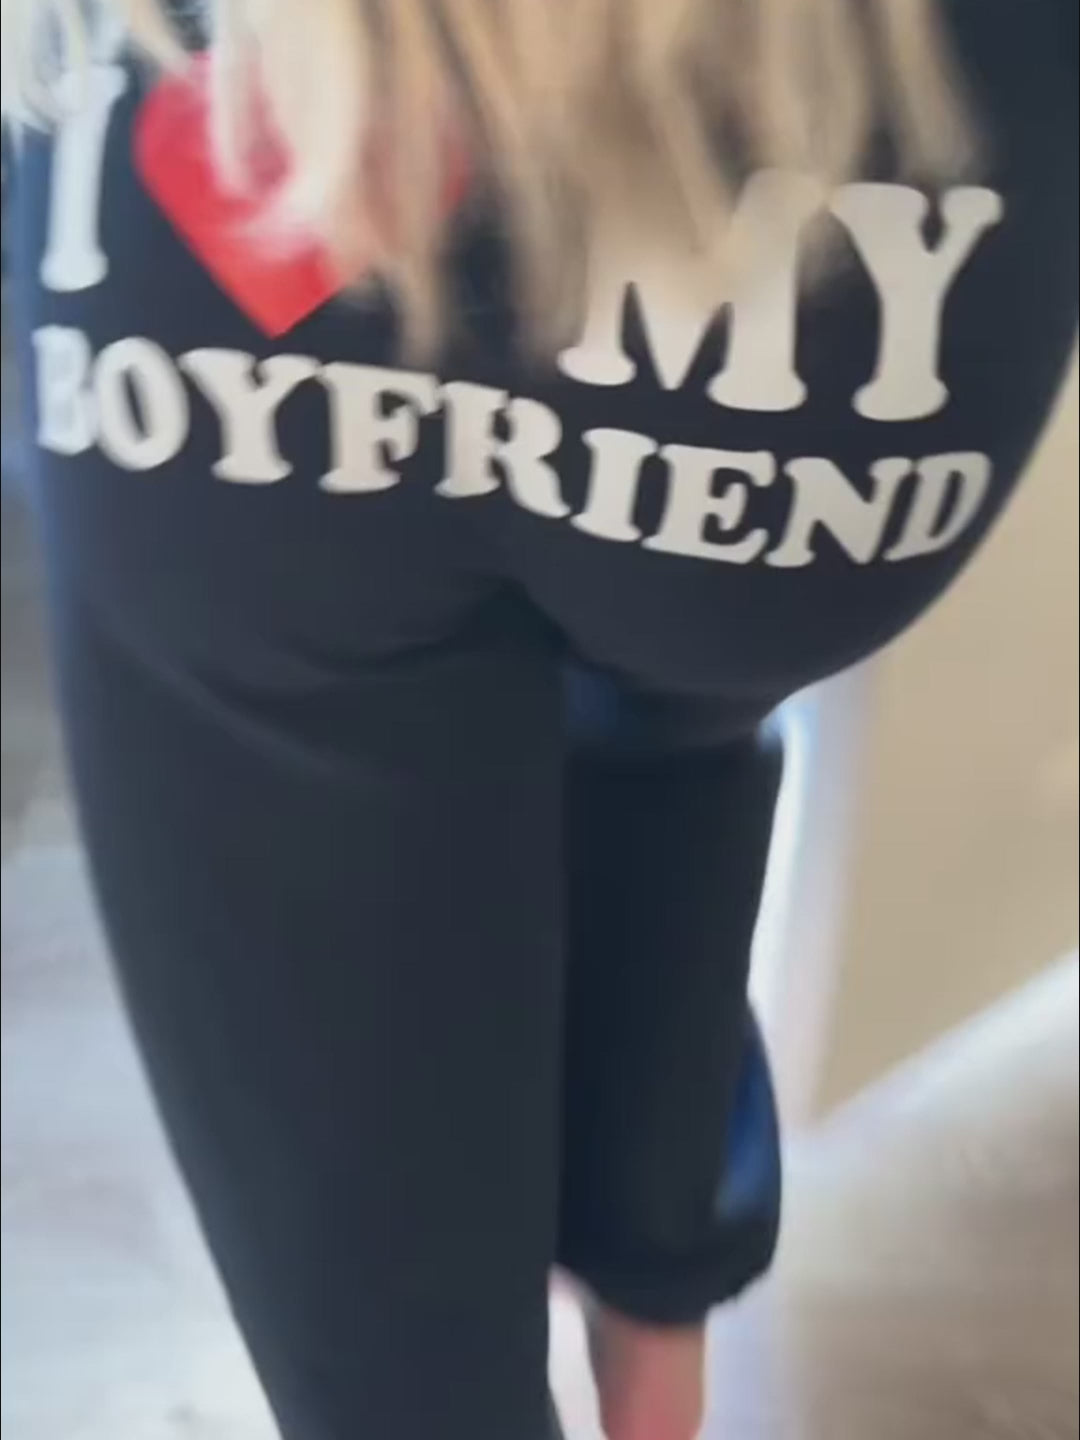 I Love MY BOYFRIEND Printed Trousers Casual Sweatpants Men And